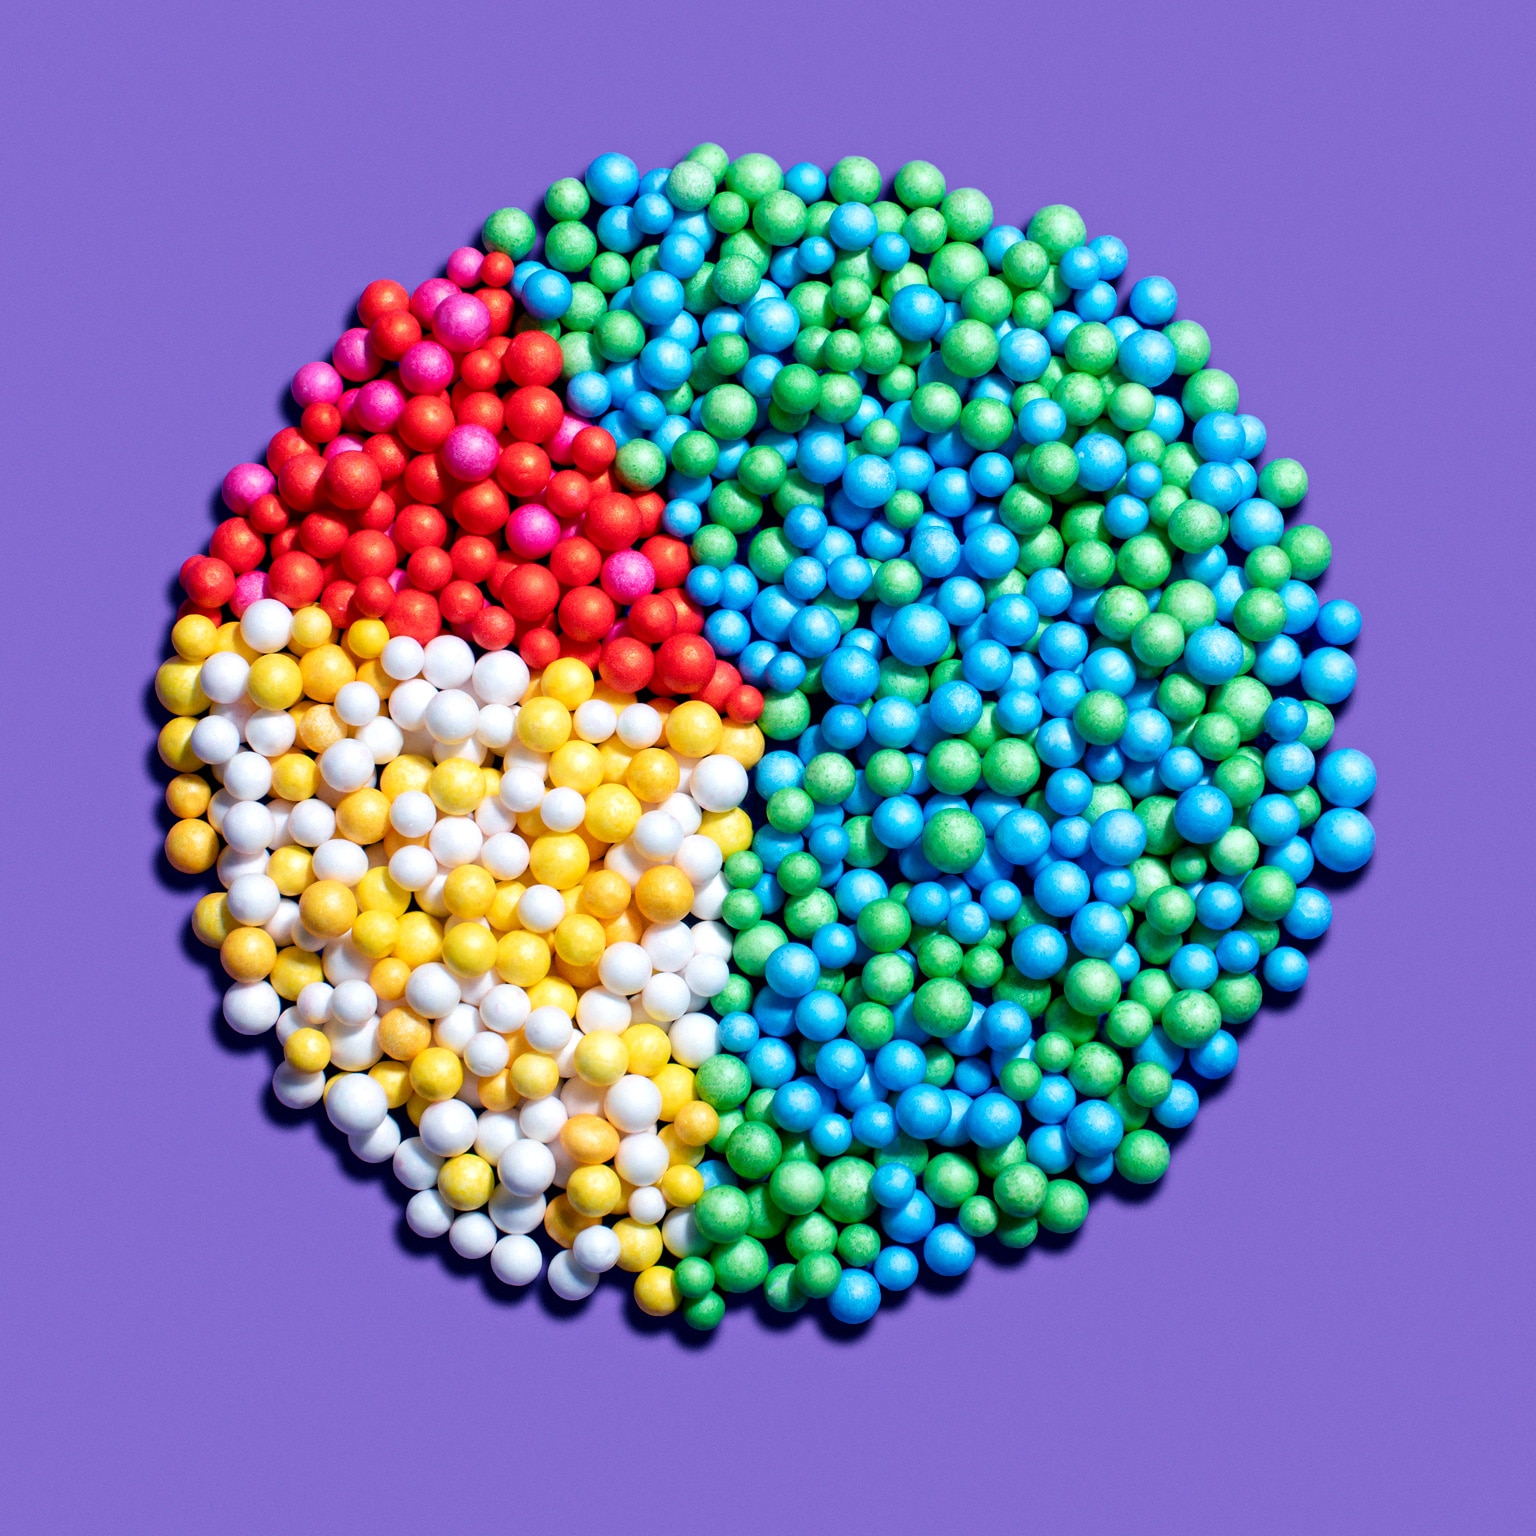 Image of a pie chart represented in various colored pellets on a purple background